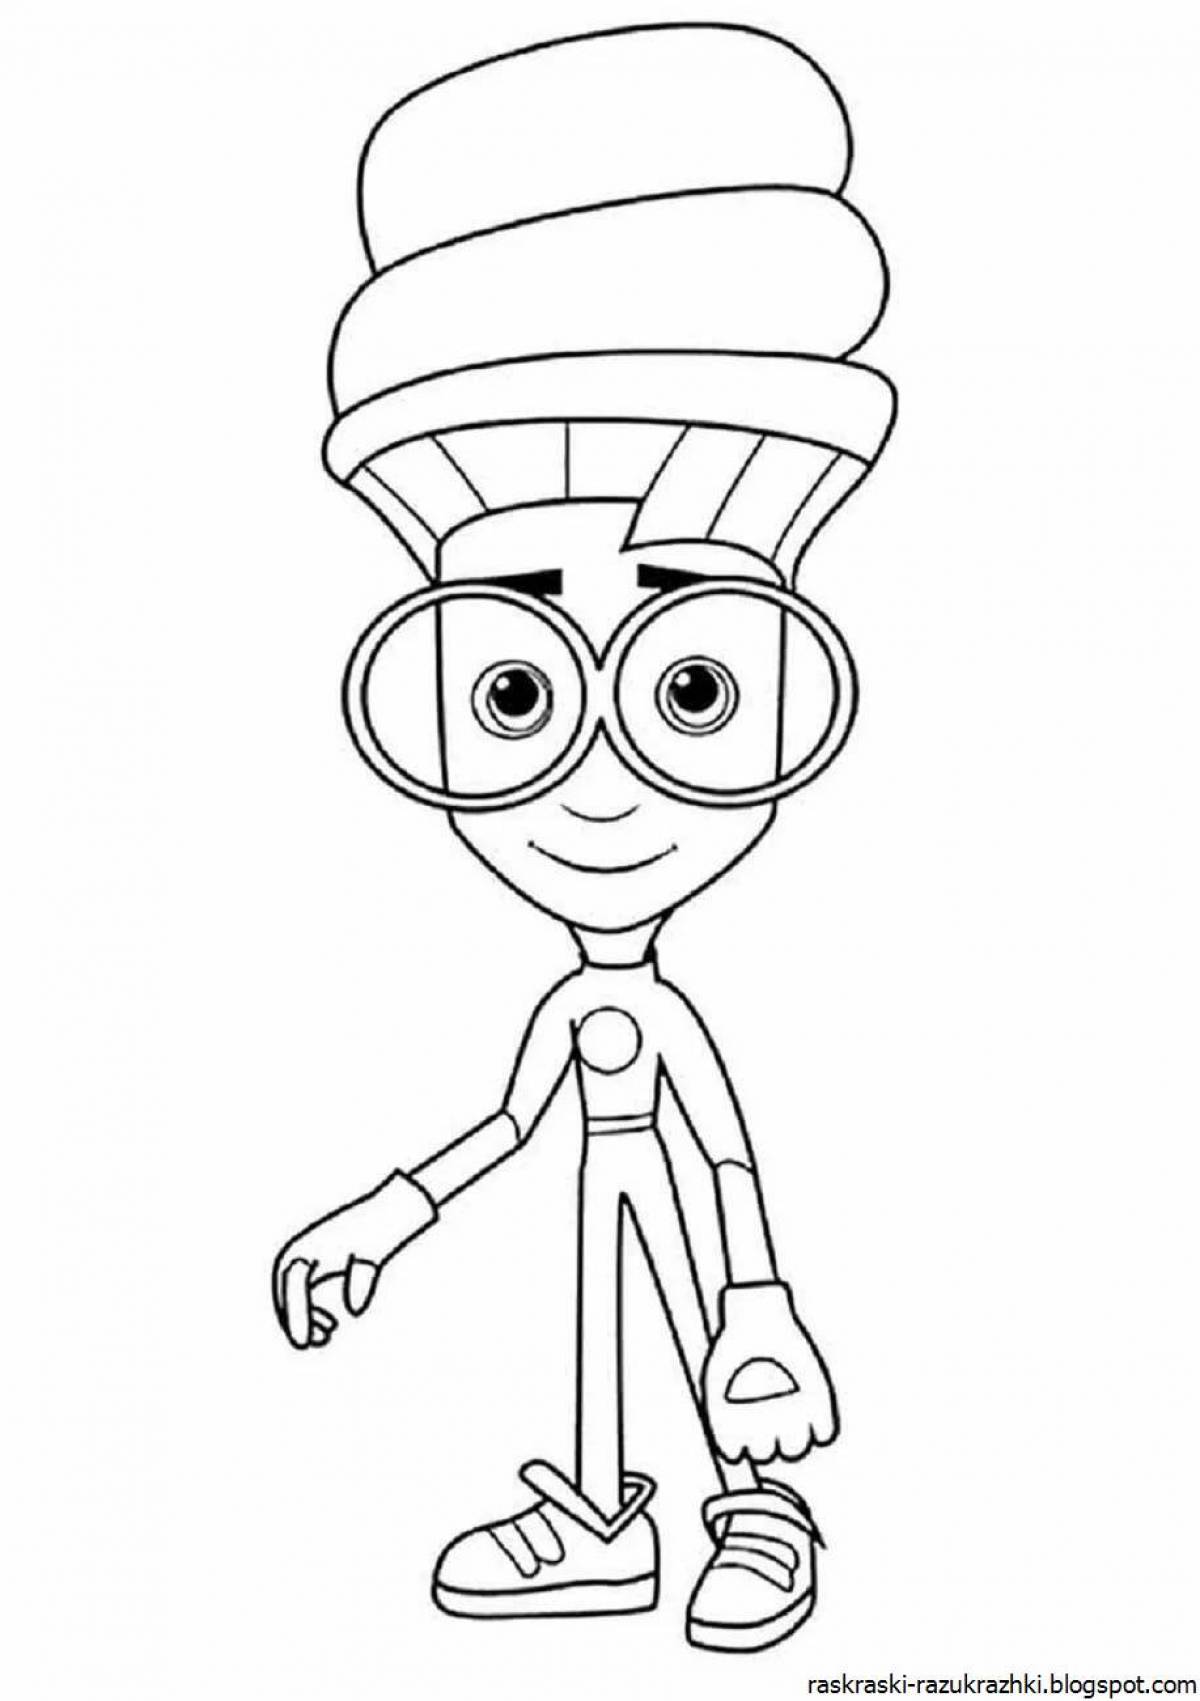 Amazing turn on the fixies coloring page